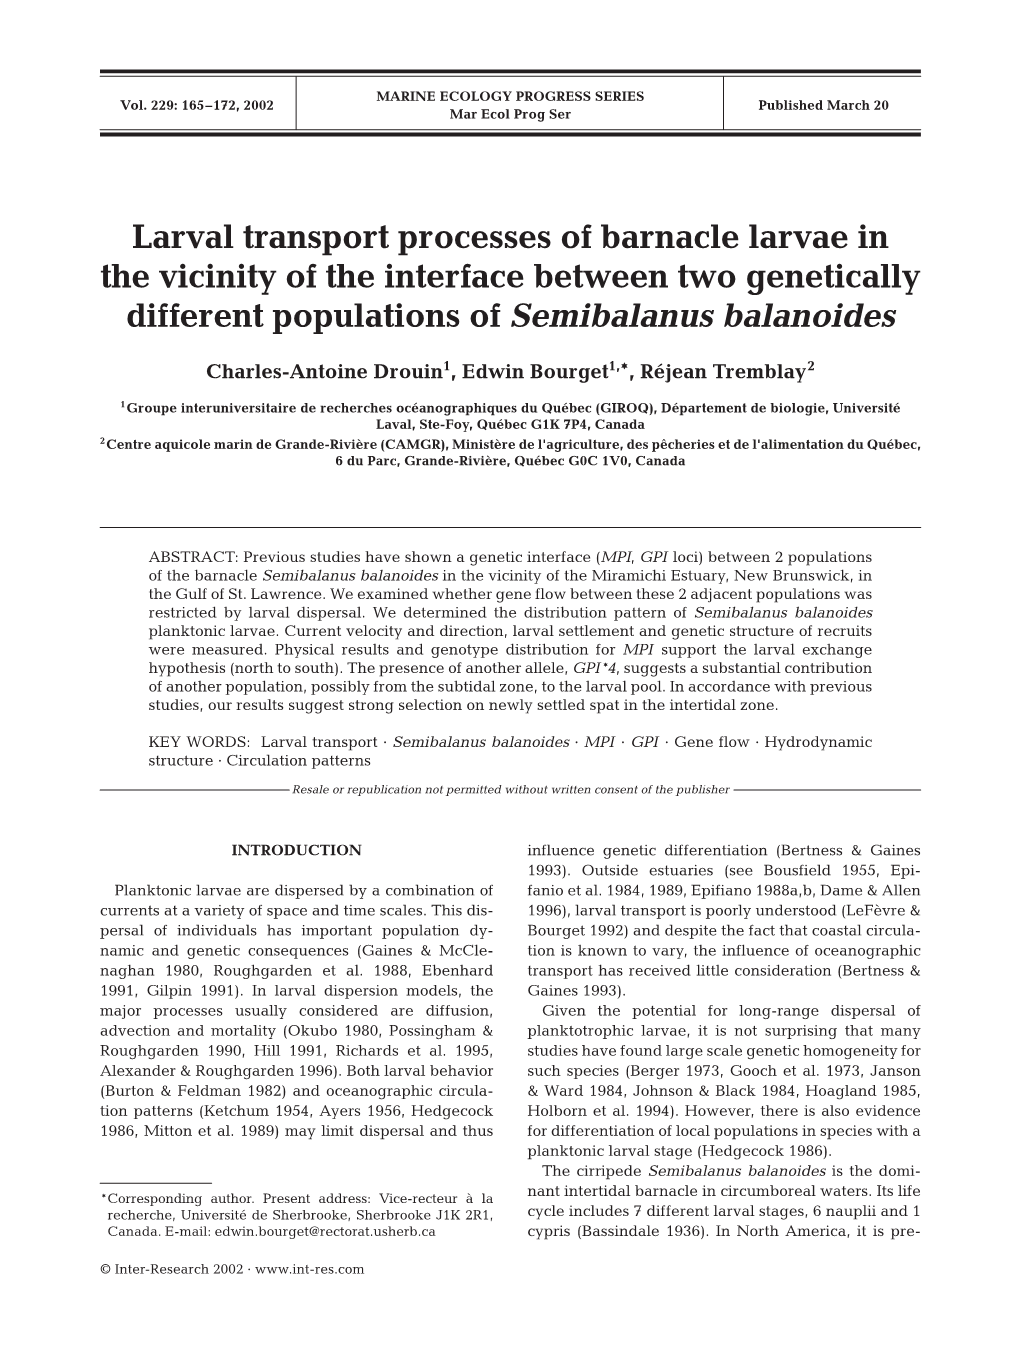 Larval Transport Processes of Barnacle Larvae in the Vicinity of the Interface Between Two Genetically Different Populations of Semibalanus Balanoides